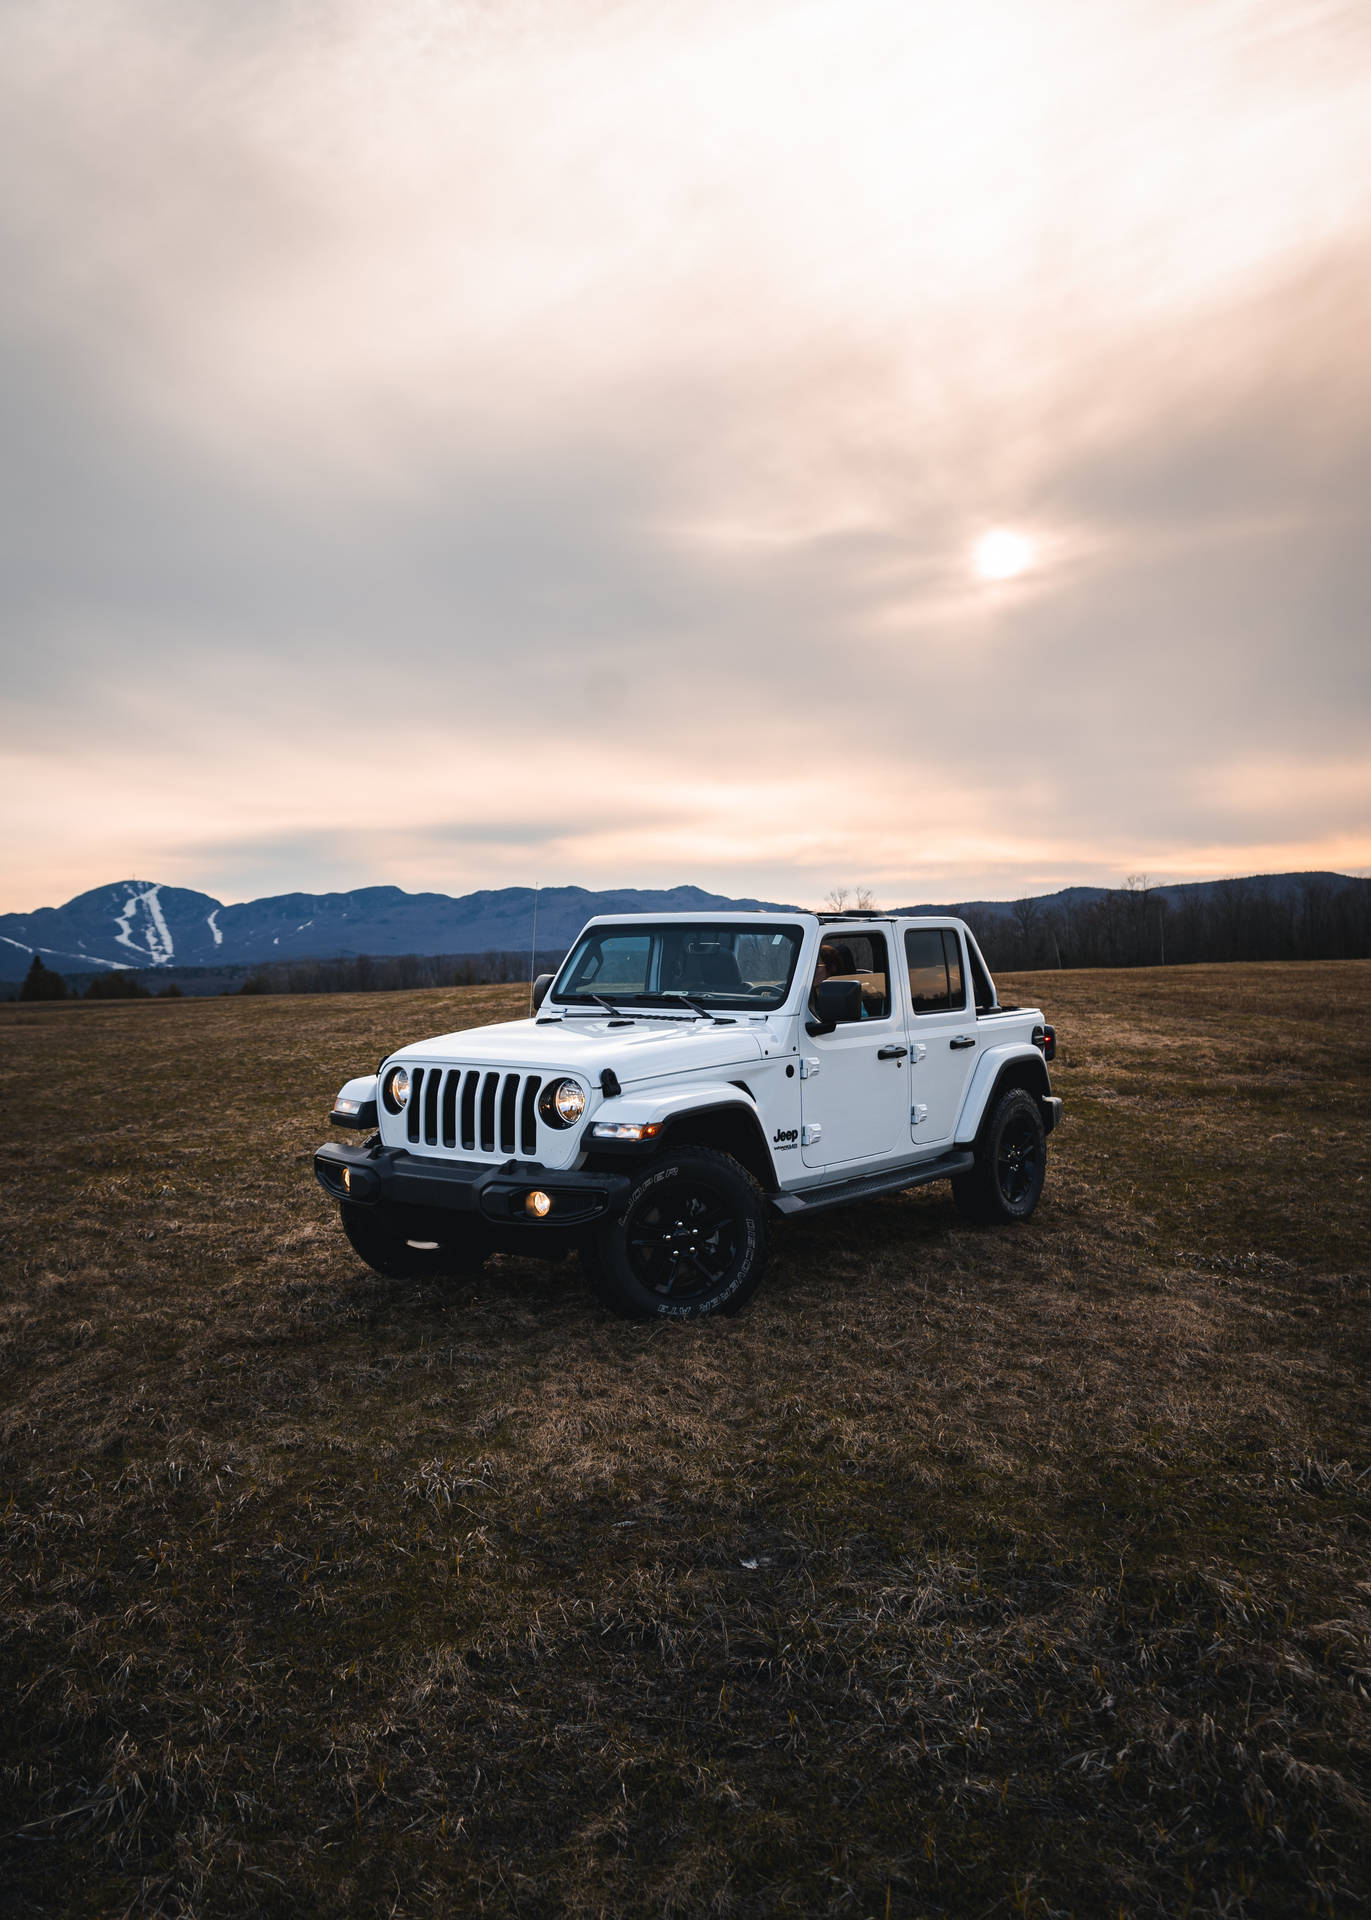 Free Jeep Wallpaper Downloads, [100+] Jeep Wallpapers for FREE |  